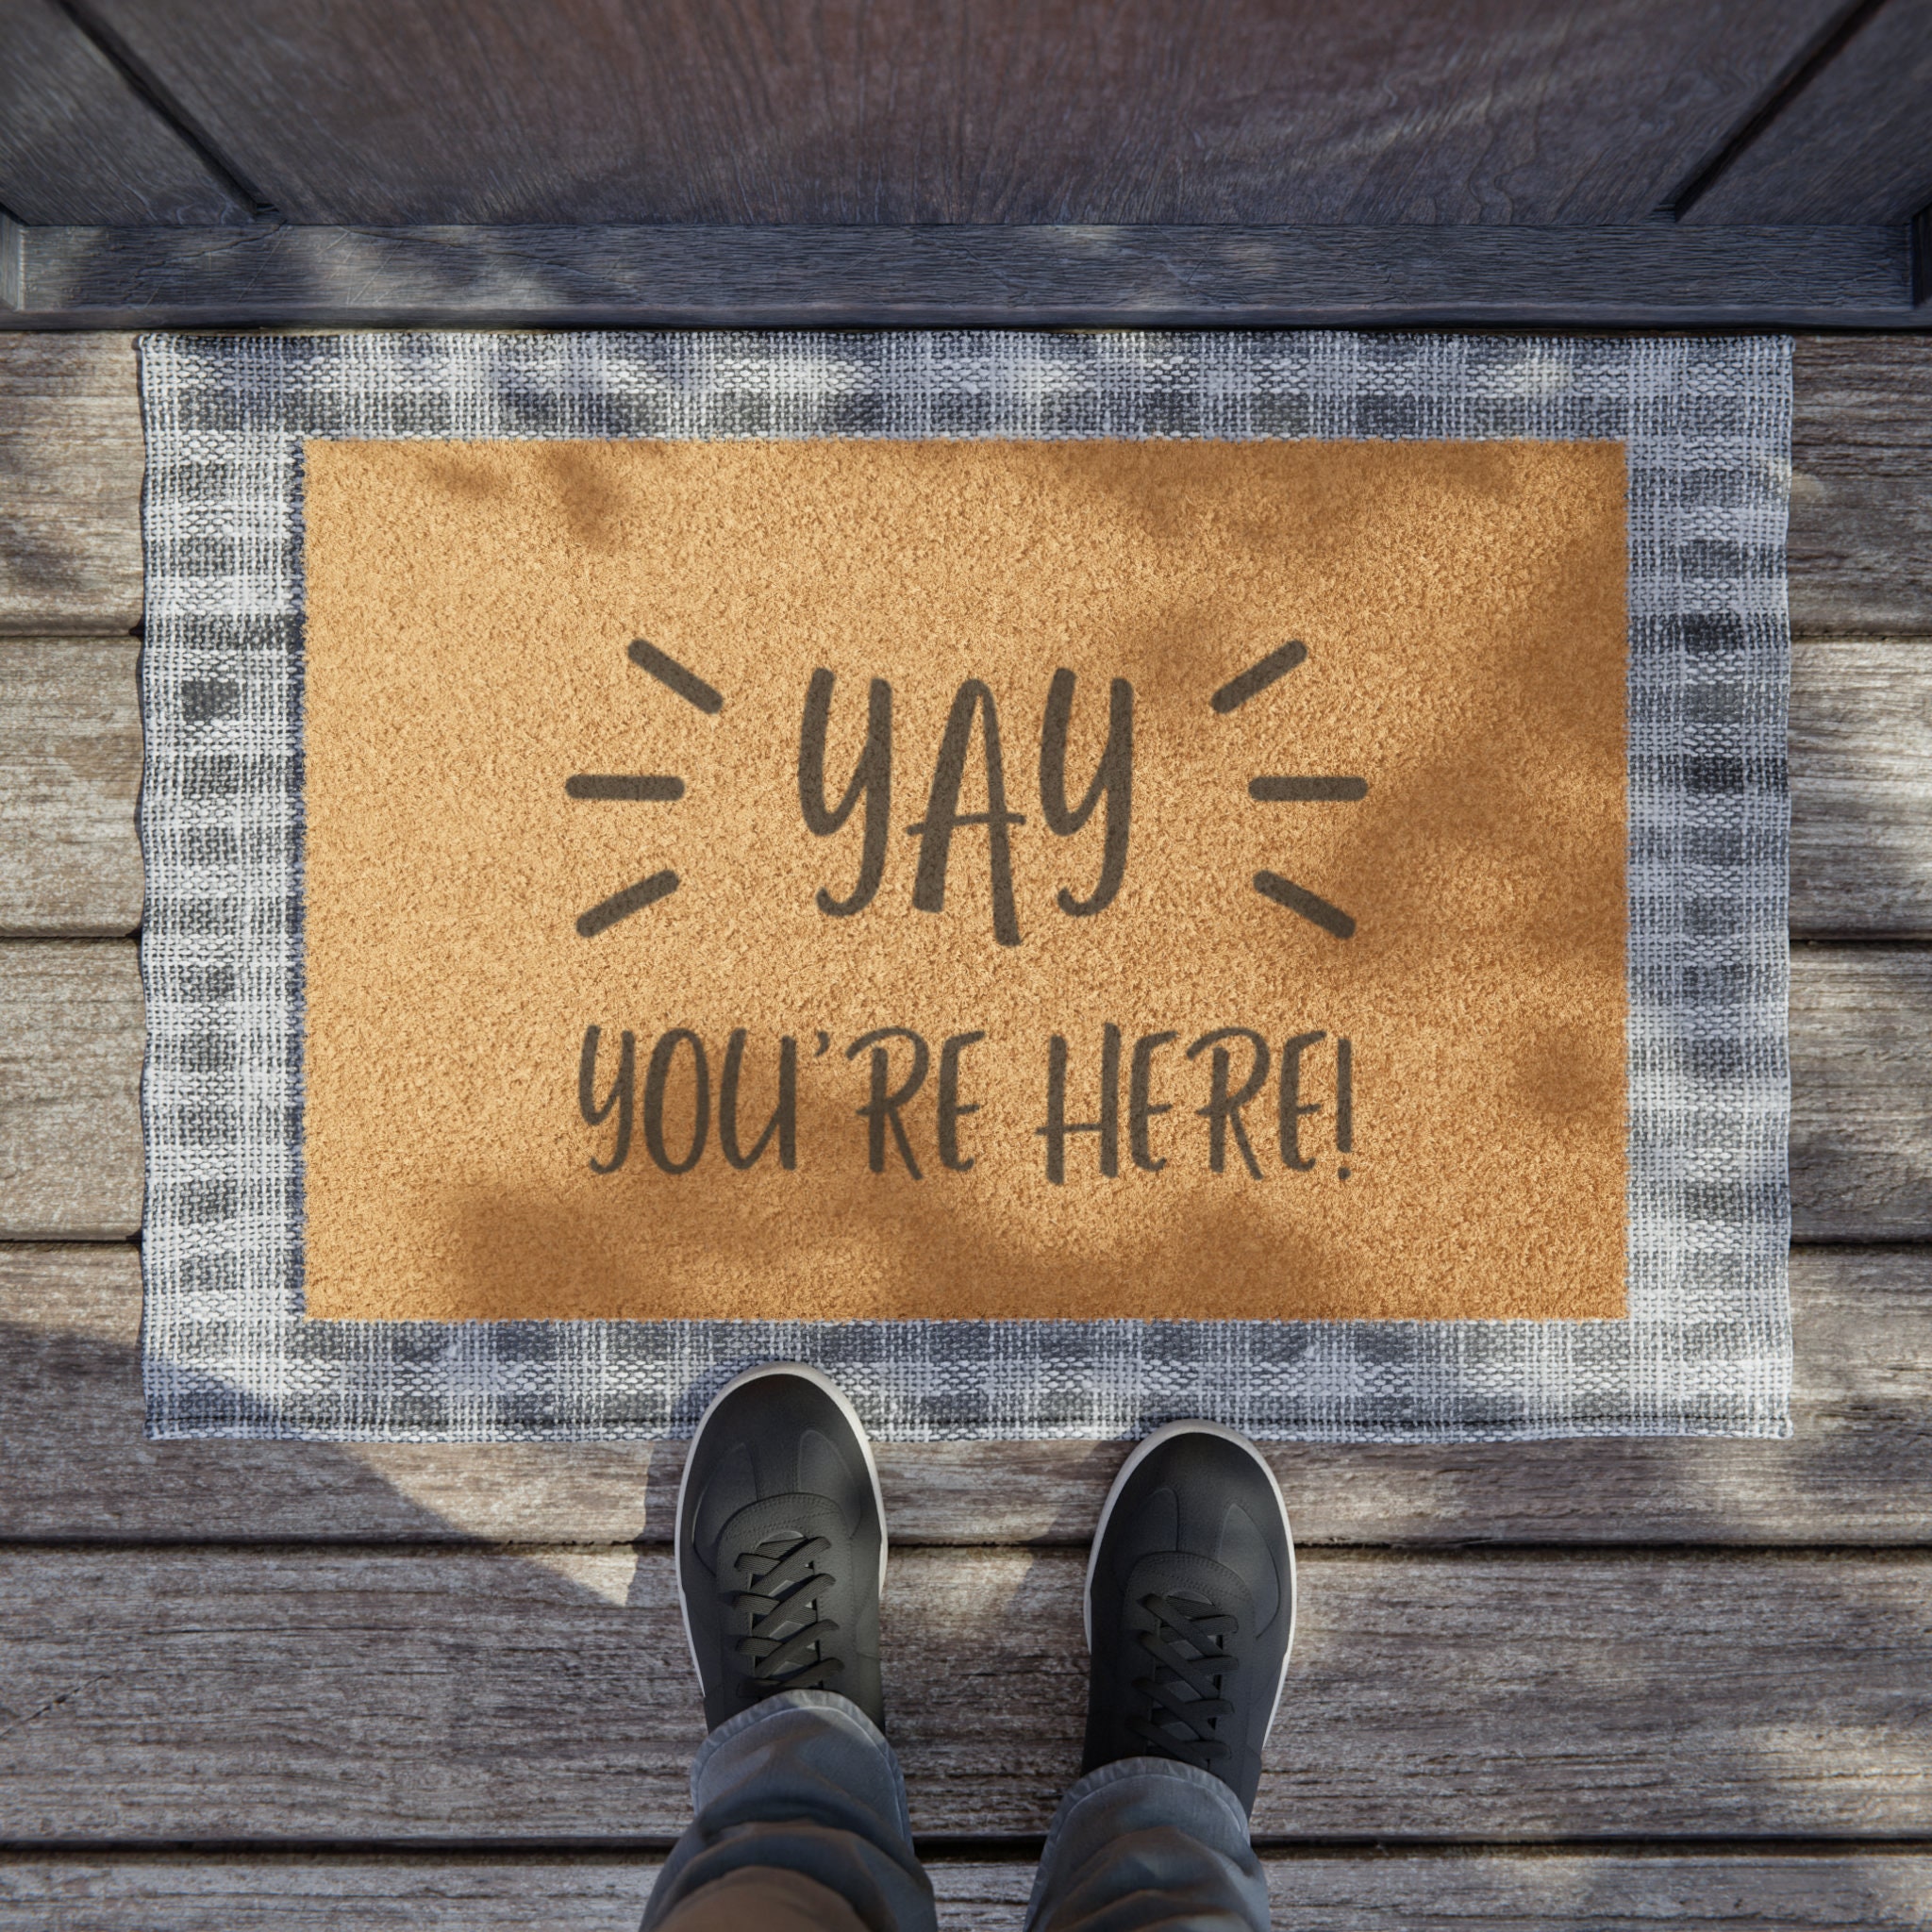 Home - Where You Park It - Personalized Doormat - Home Decor, Funny Gi –  Macorner